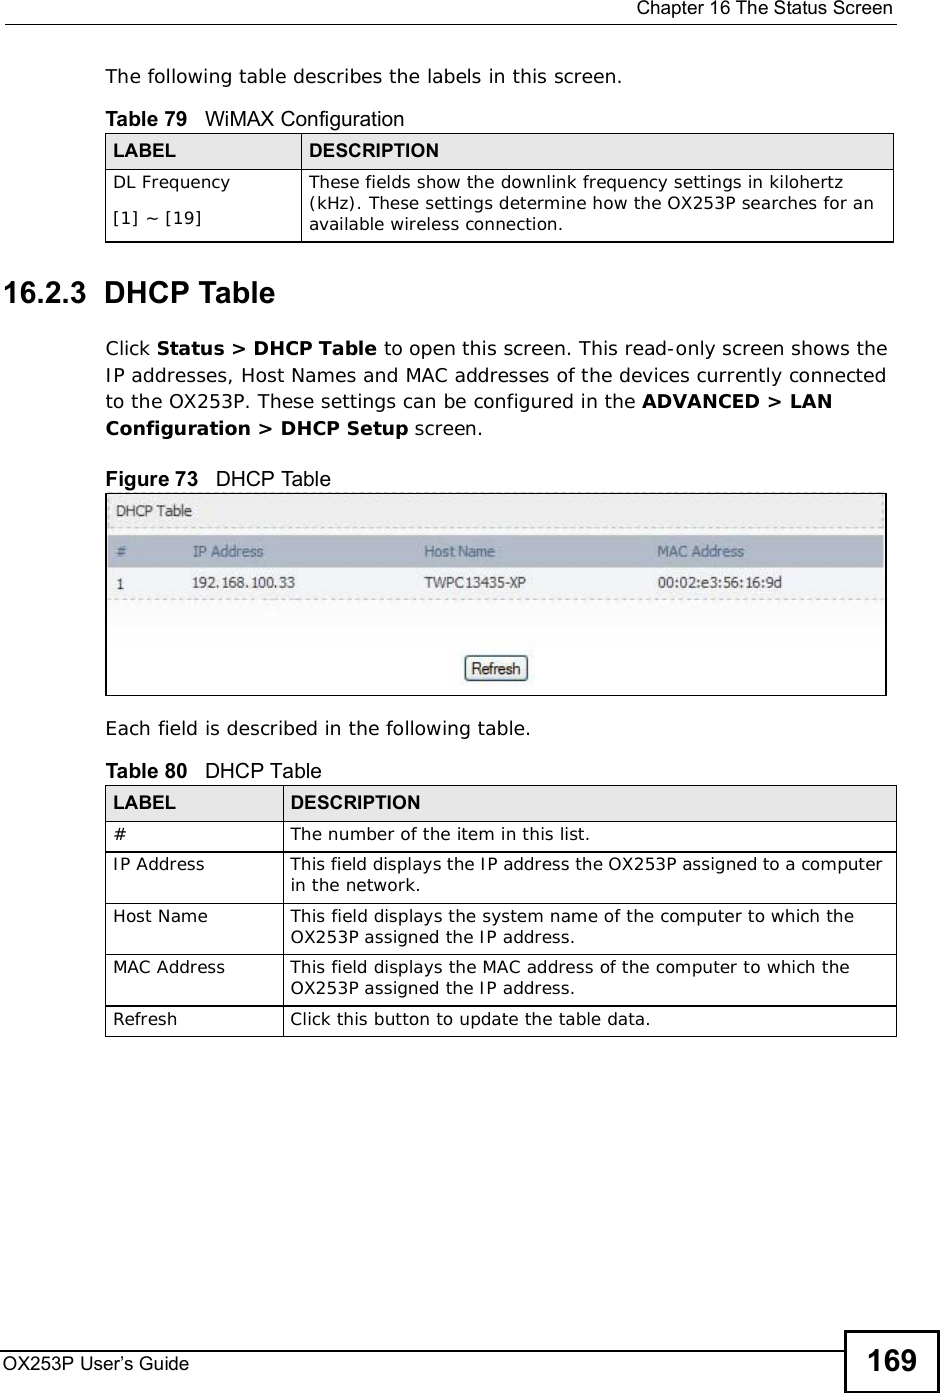  Chapter 16The Status ScreenOX253P User’s Guide 169The following table describes the labels in this screen. 16.2.3  DHCP TableClick Status &gt; DHCP Table to open this screen. This read-only screen shows the IP addresses, Host Names and MAC addresses of the devices currently connected to the OX253P. These settings can be configured in the ADVANCED &gt; LAN Configuration &gt; DHCP Setup screen.Figure 73   DHCP TableEach field is described in the following table.Table 79   WiMAX ConfigurationLABEL DESCRIPTIONDL Frequency[1] ~ [19]These fields show the downlink frequency settings in kilohertz (kHz). These settings determine how the OX253P searches for an available wireless connection.Table 80   DHCP TableLABEL DESCRIPTION#The number of the item in this list.IP AddressThis field displays the IP address the OX253P assigned to a computer in the network.Host NameThis field displays the system name of the computer to which the OX253P assigned the IP address.MAC AddressThis field displays the MAC address of the computer to which the OX253P assigned the IP address.RefreshClick this button to update the table data.